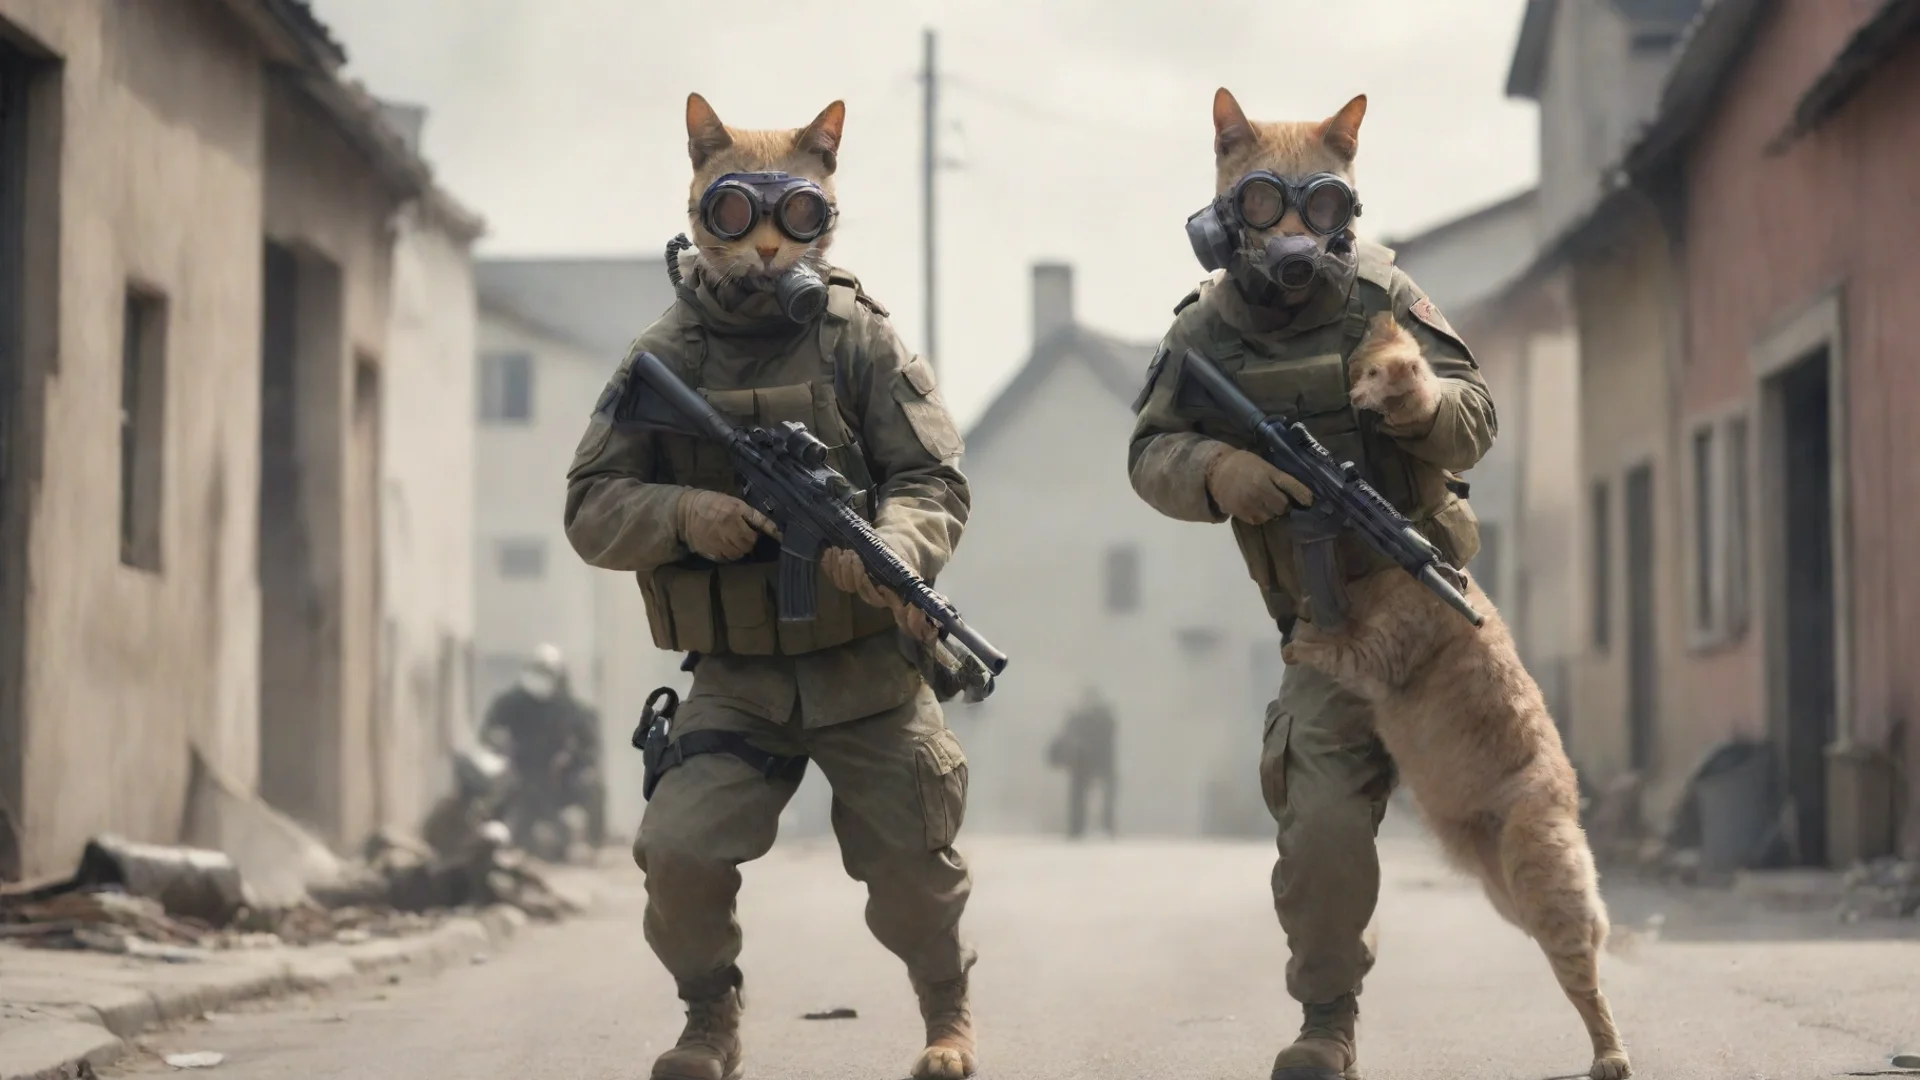 aiamazing cat soldier with gas mask shooting dog soldier in a small town awesome portrait 2 wide